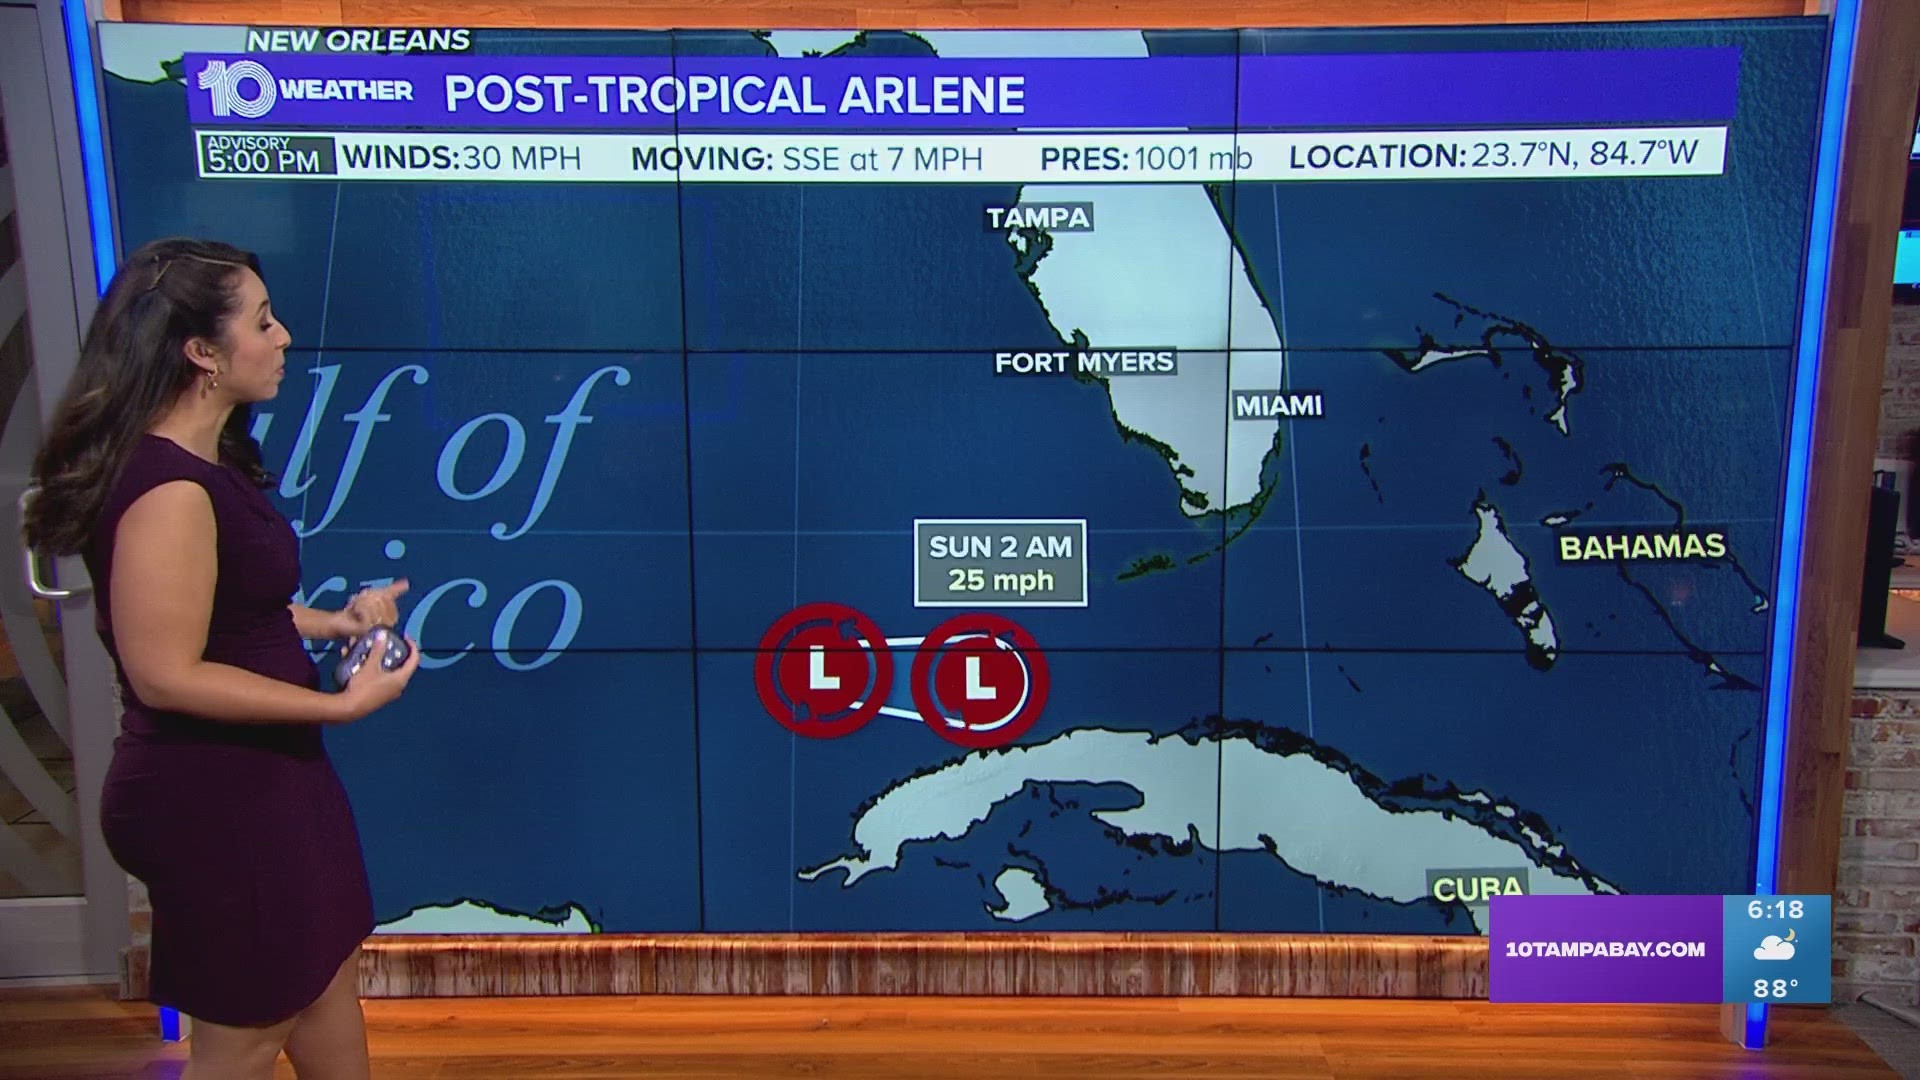 It's forecast that Arlene will weaken into the weekend and degenerate into a remnant low this week.